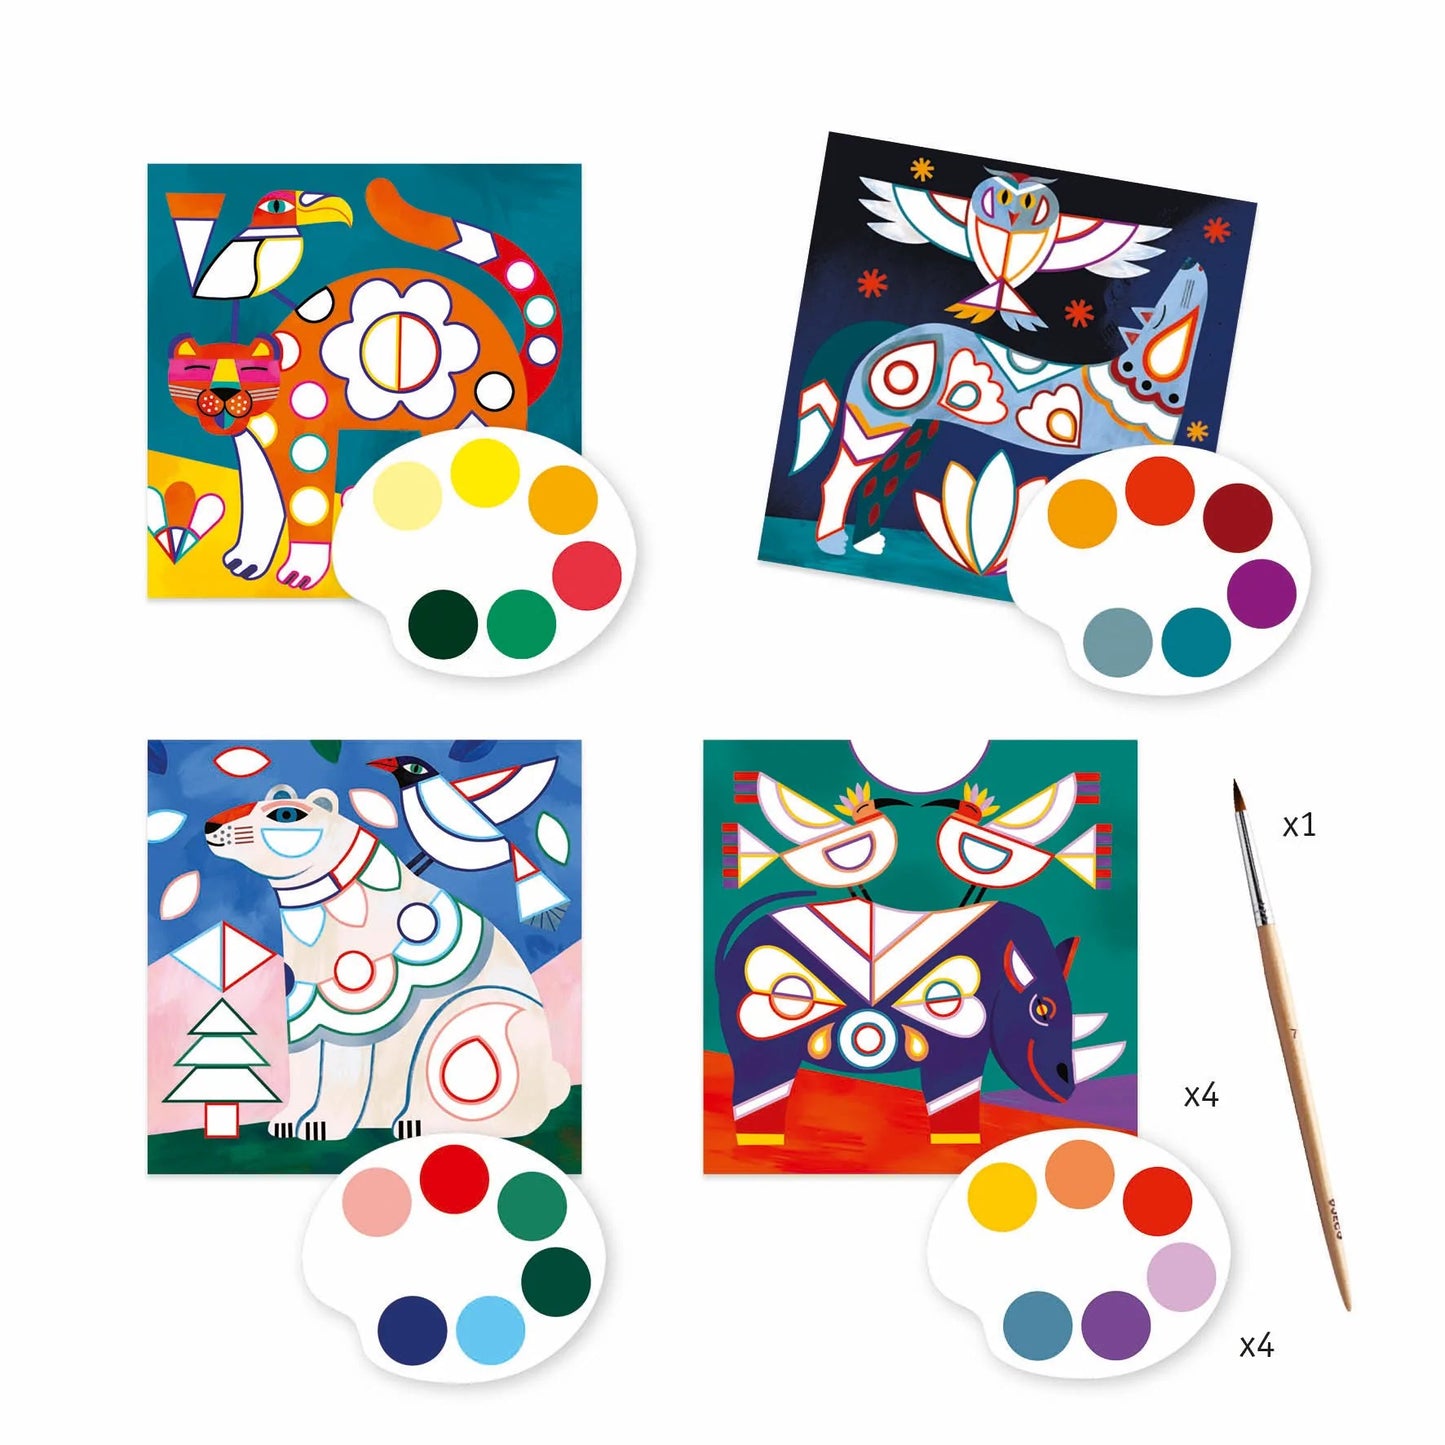 Fanciful Bestiary Surprise Watercolor Painting Set